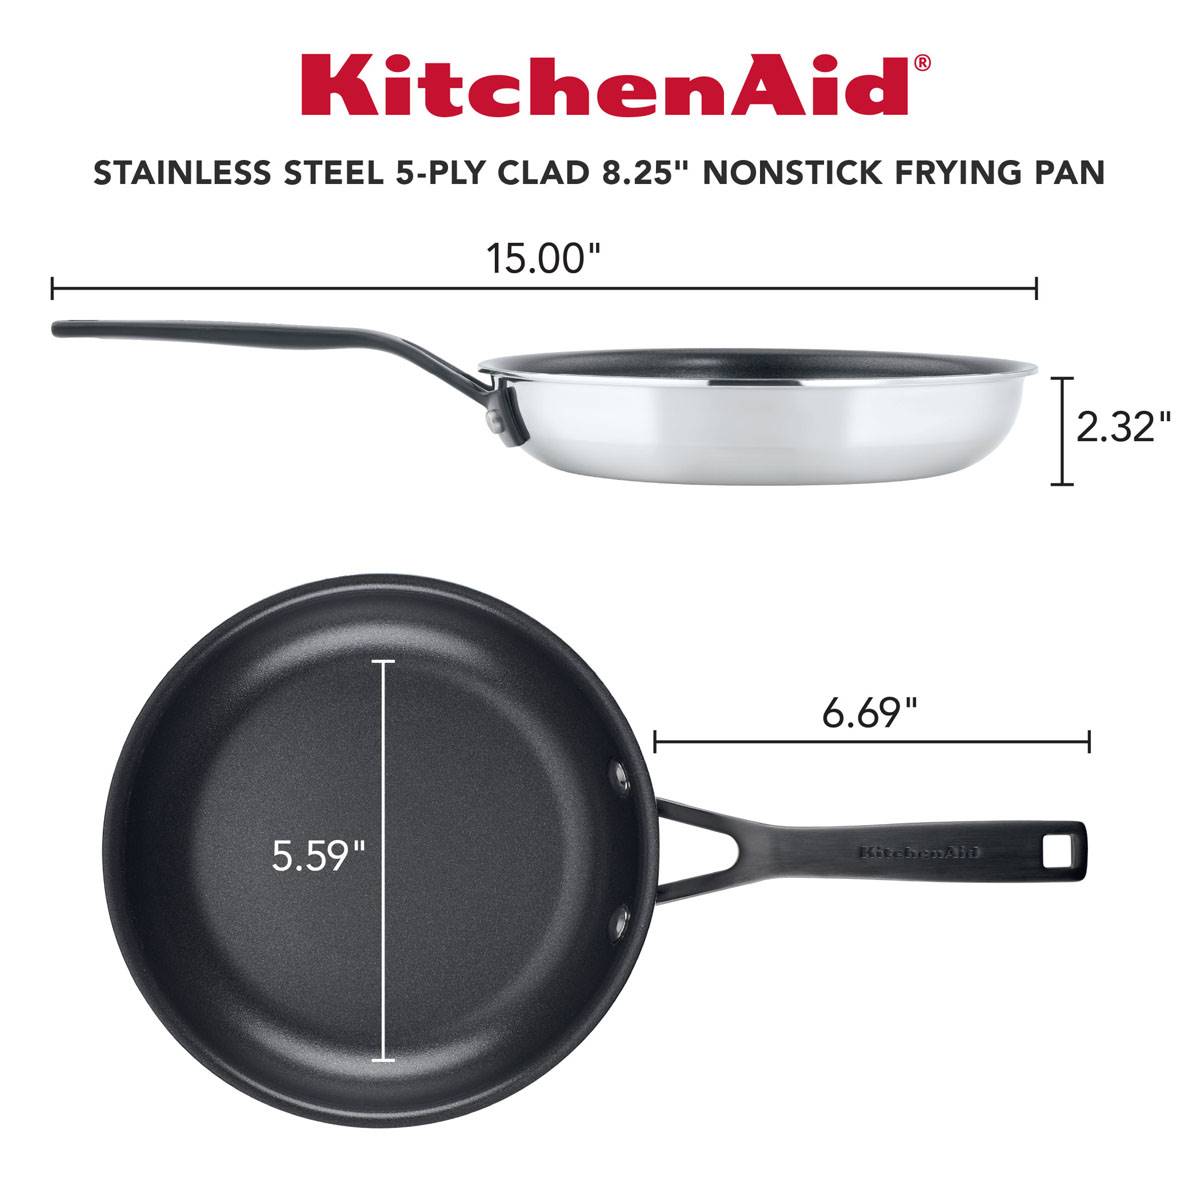 KitchenAid(R) 8.25in. 5-Ply Stainless Steel Nonstick Frying Pan